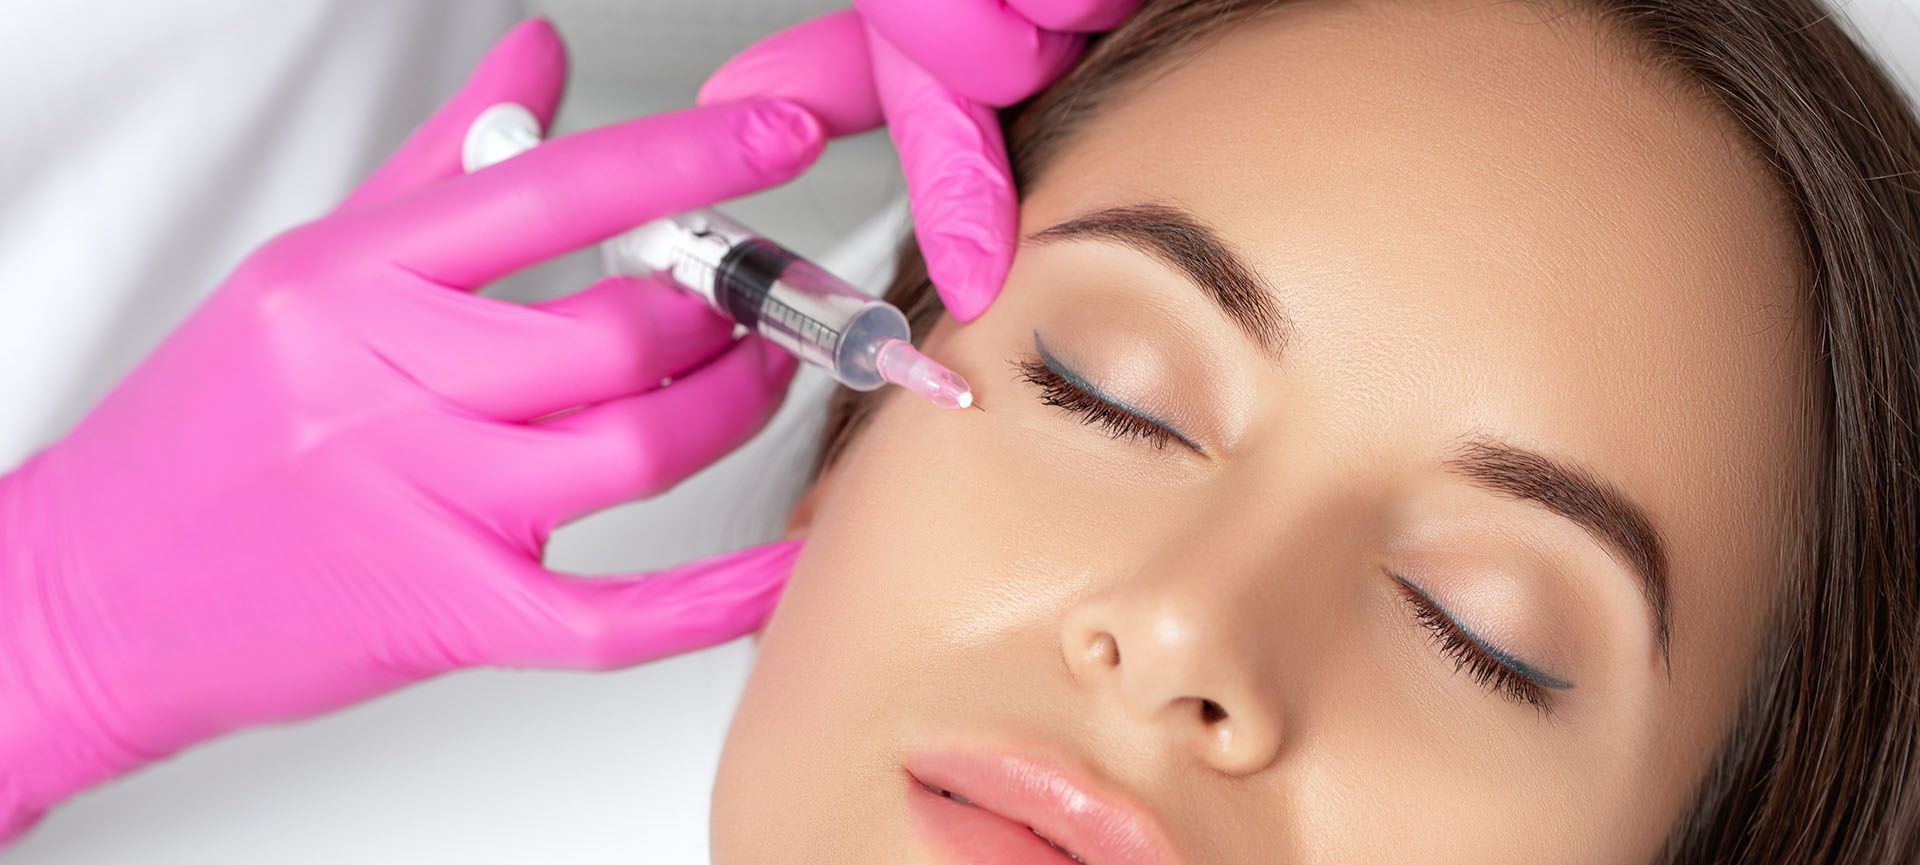 botox injections cost